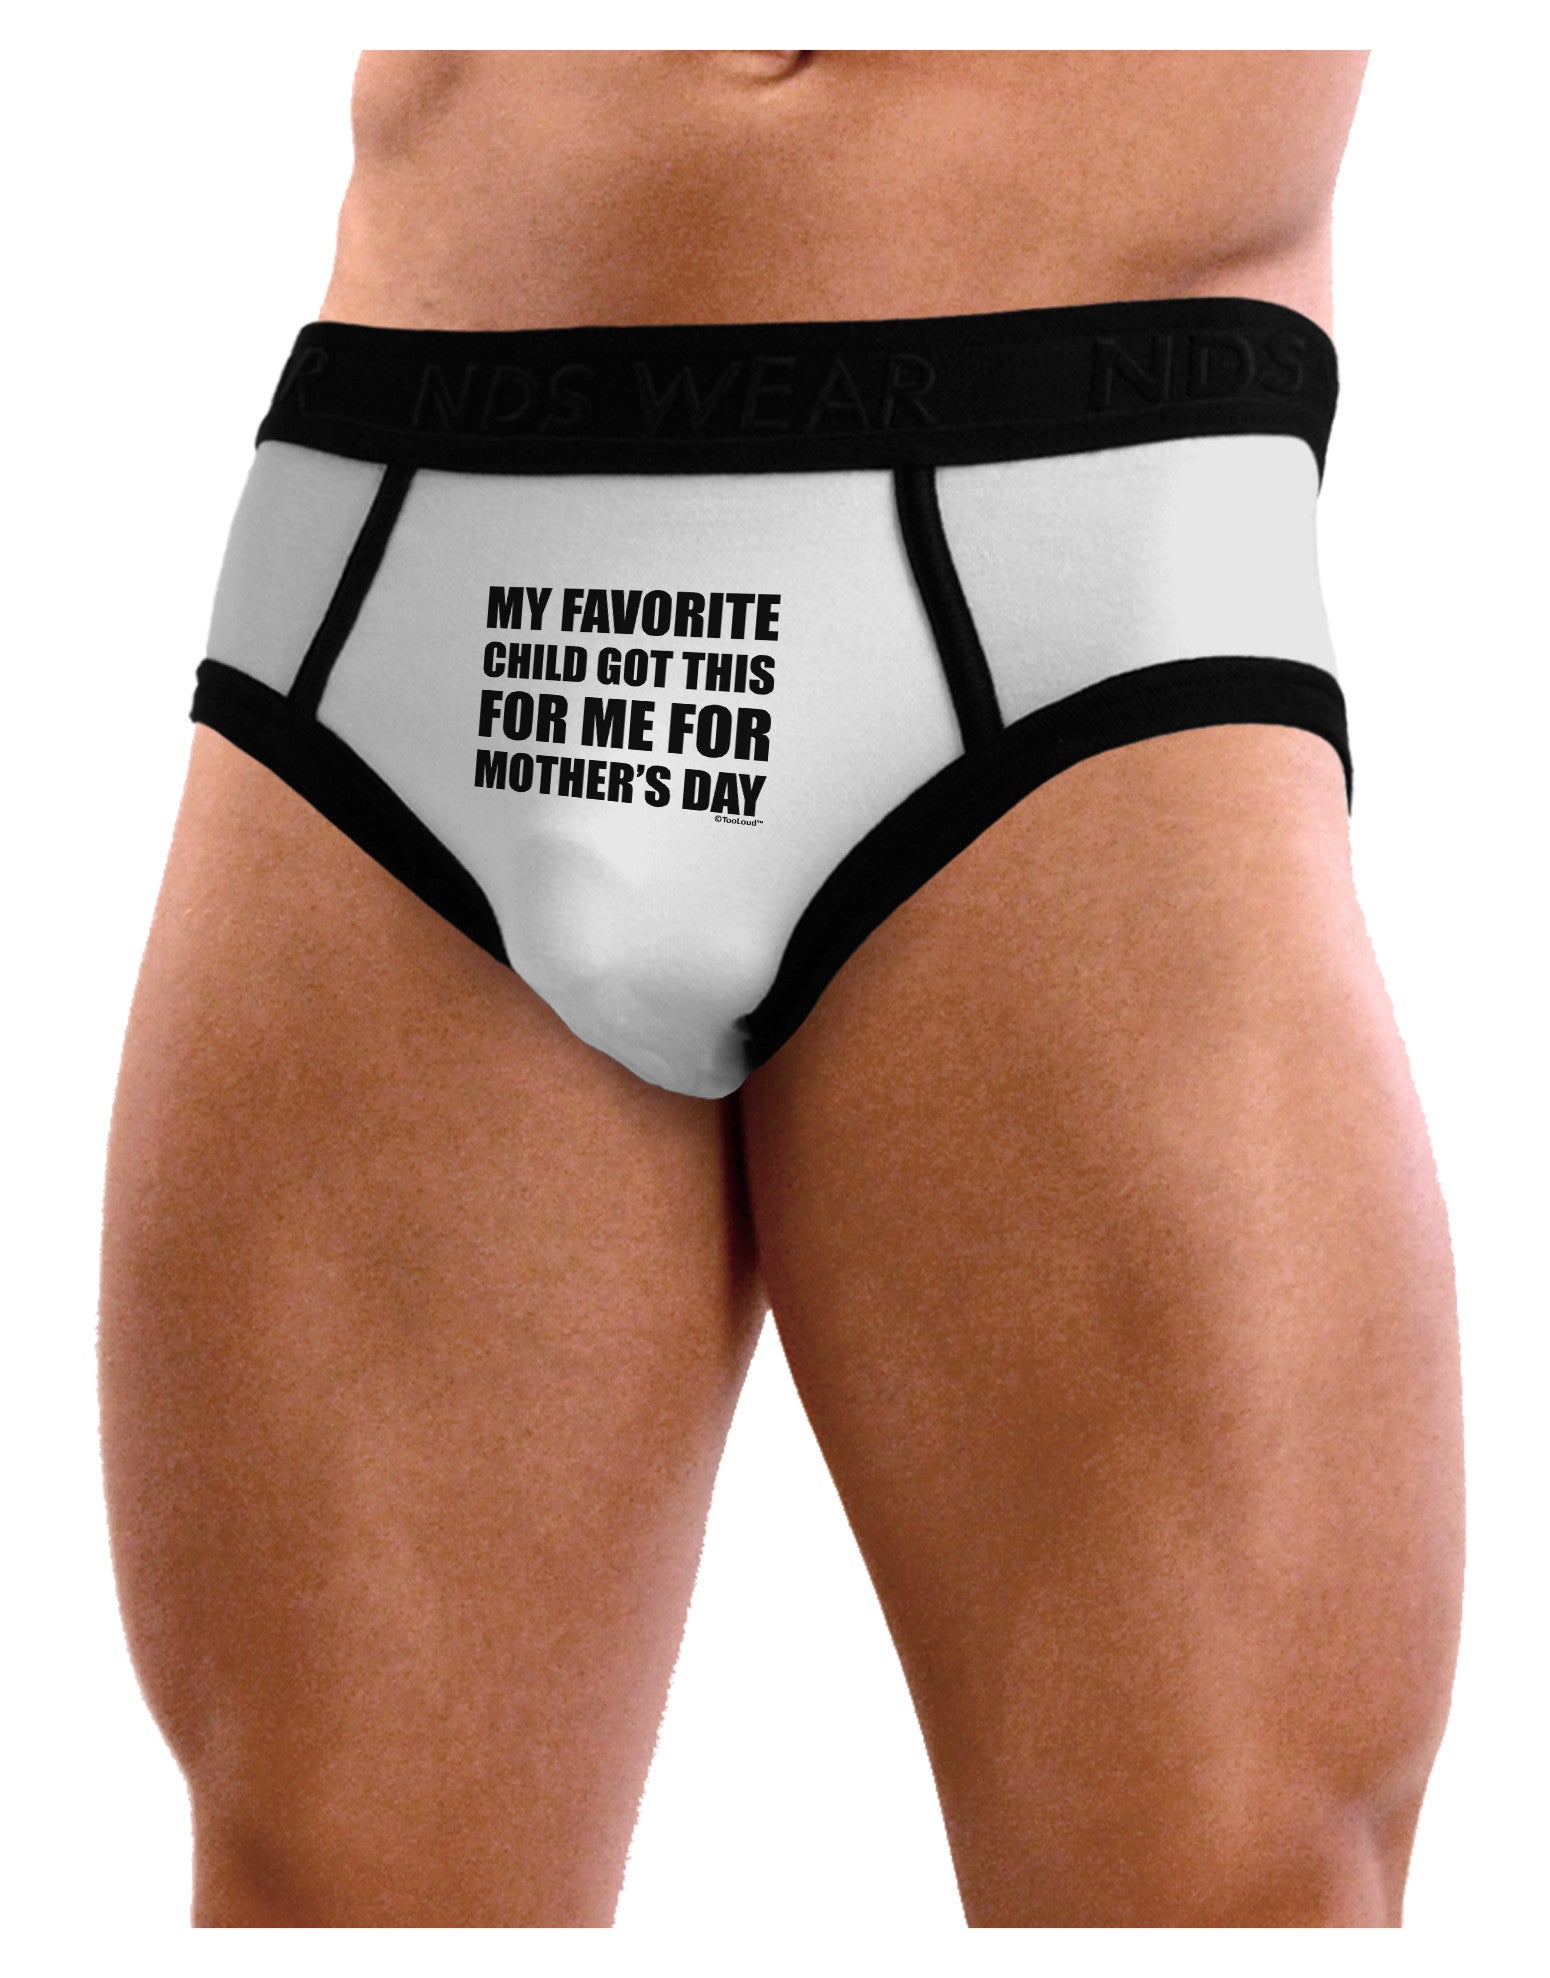 My Favorite Child Got This for Me for Mother's Day Womens Thong Underwear  by TooLoud